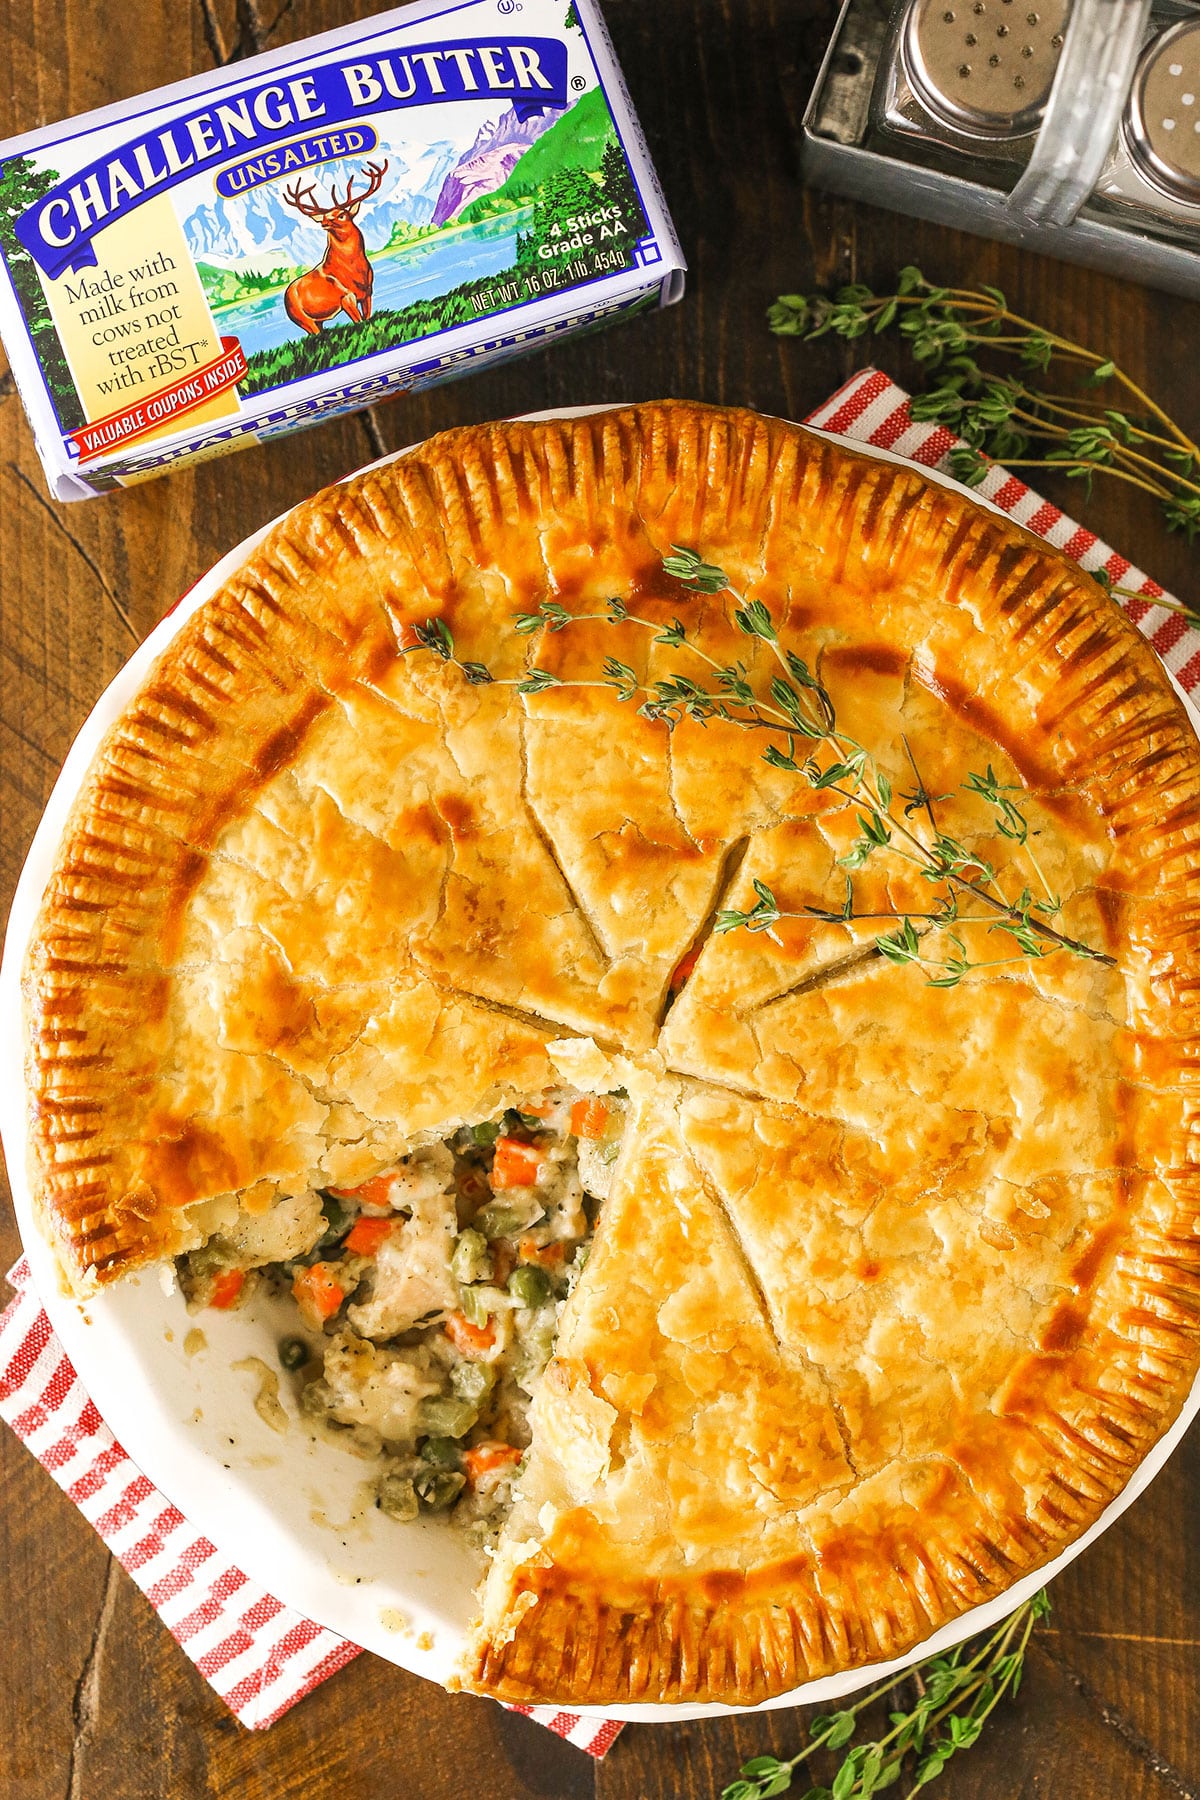 chicken pot pie with a slice taken and challenge butter package